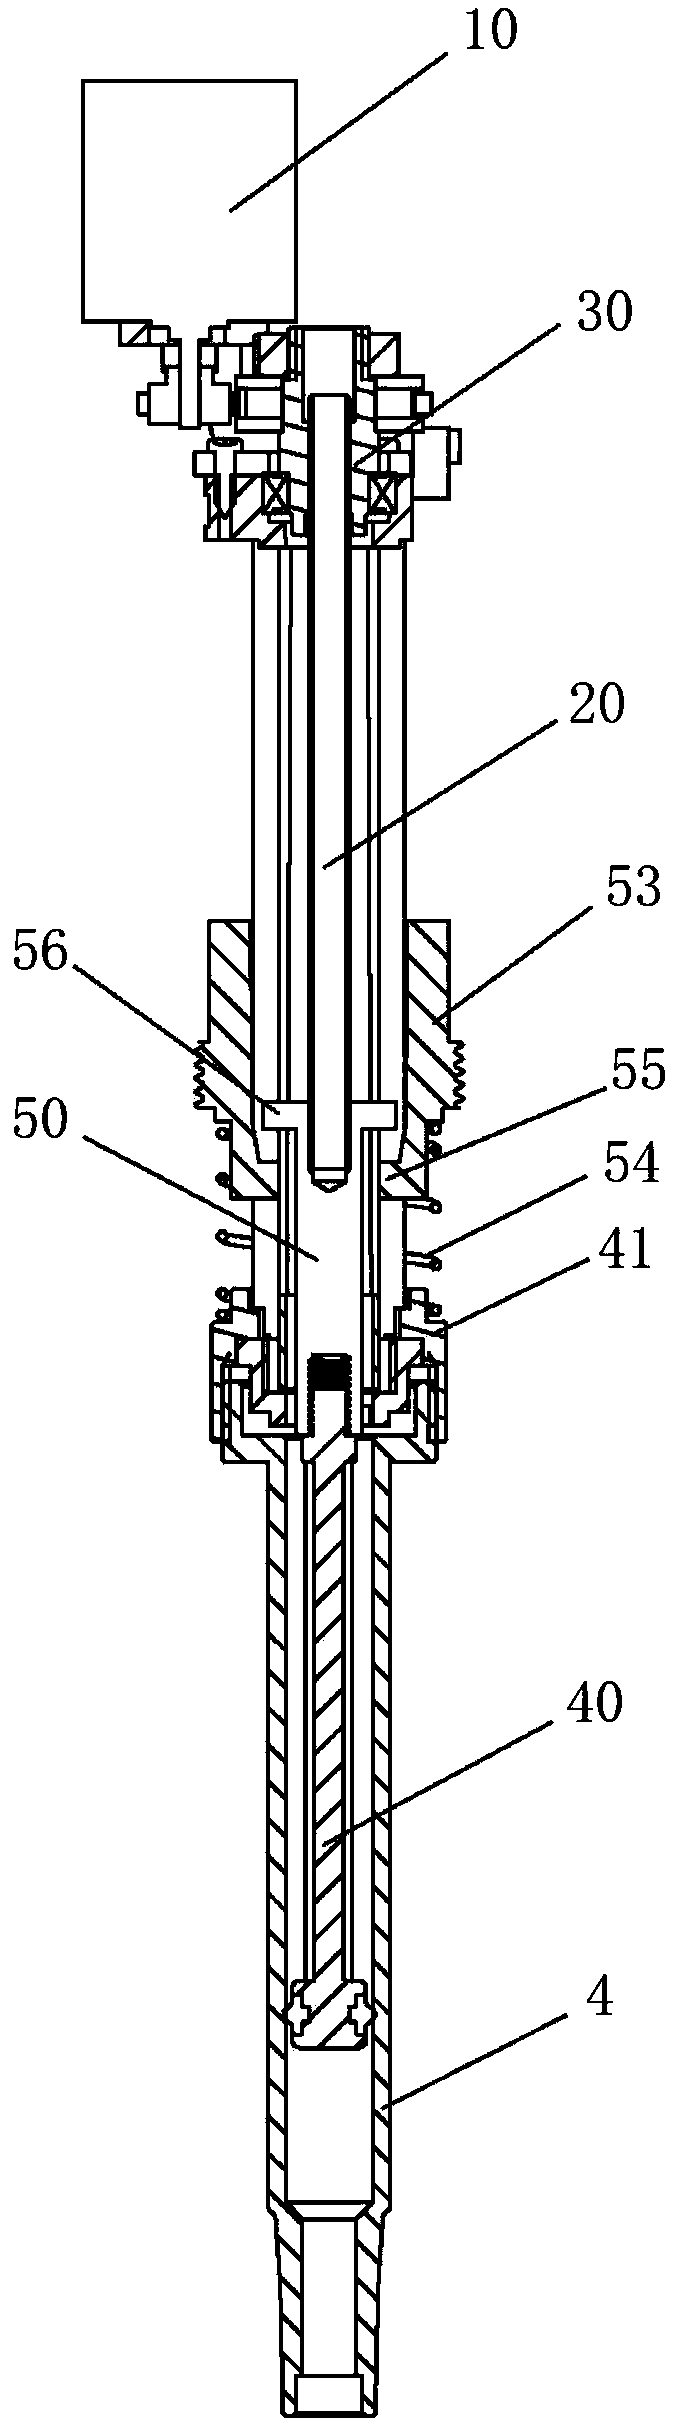 Clutch mechanism of electric pipette